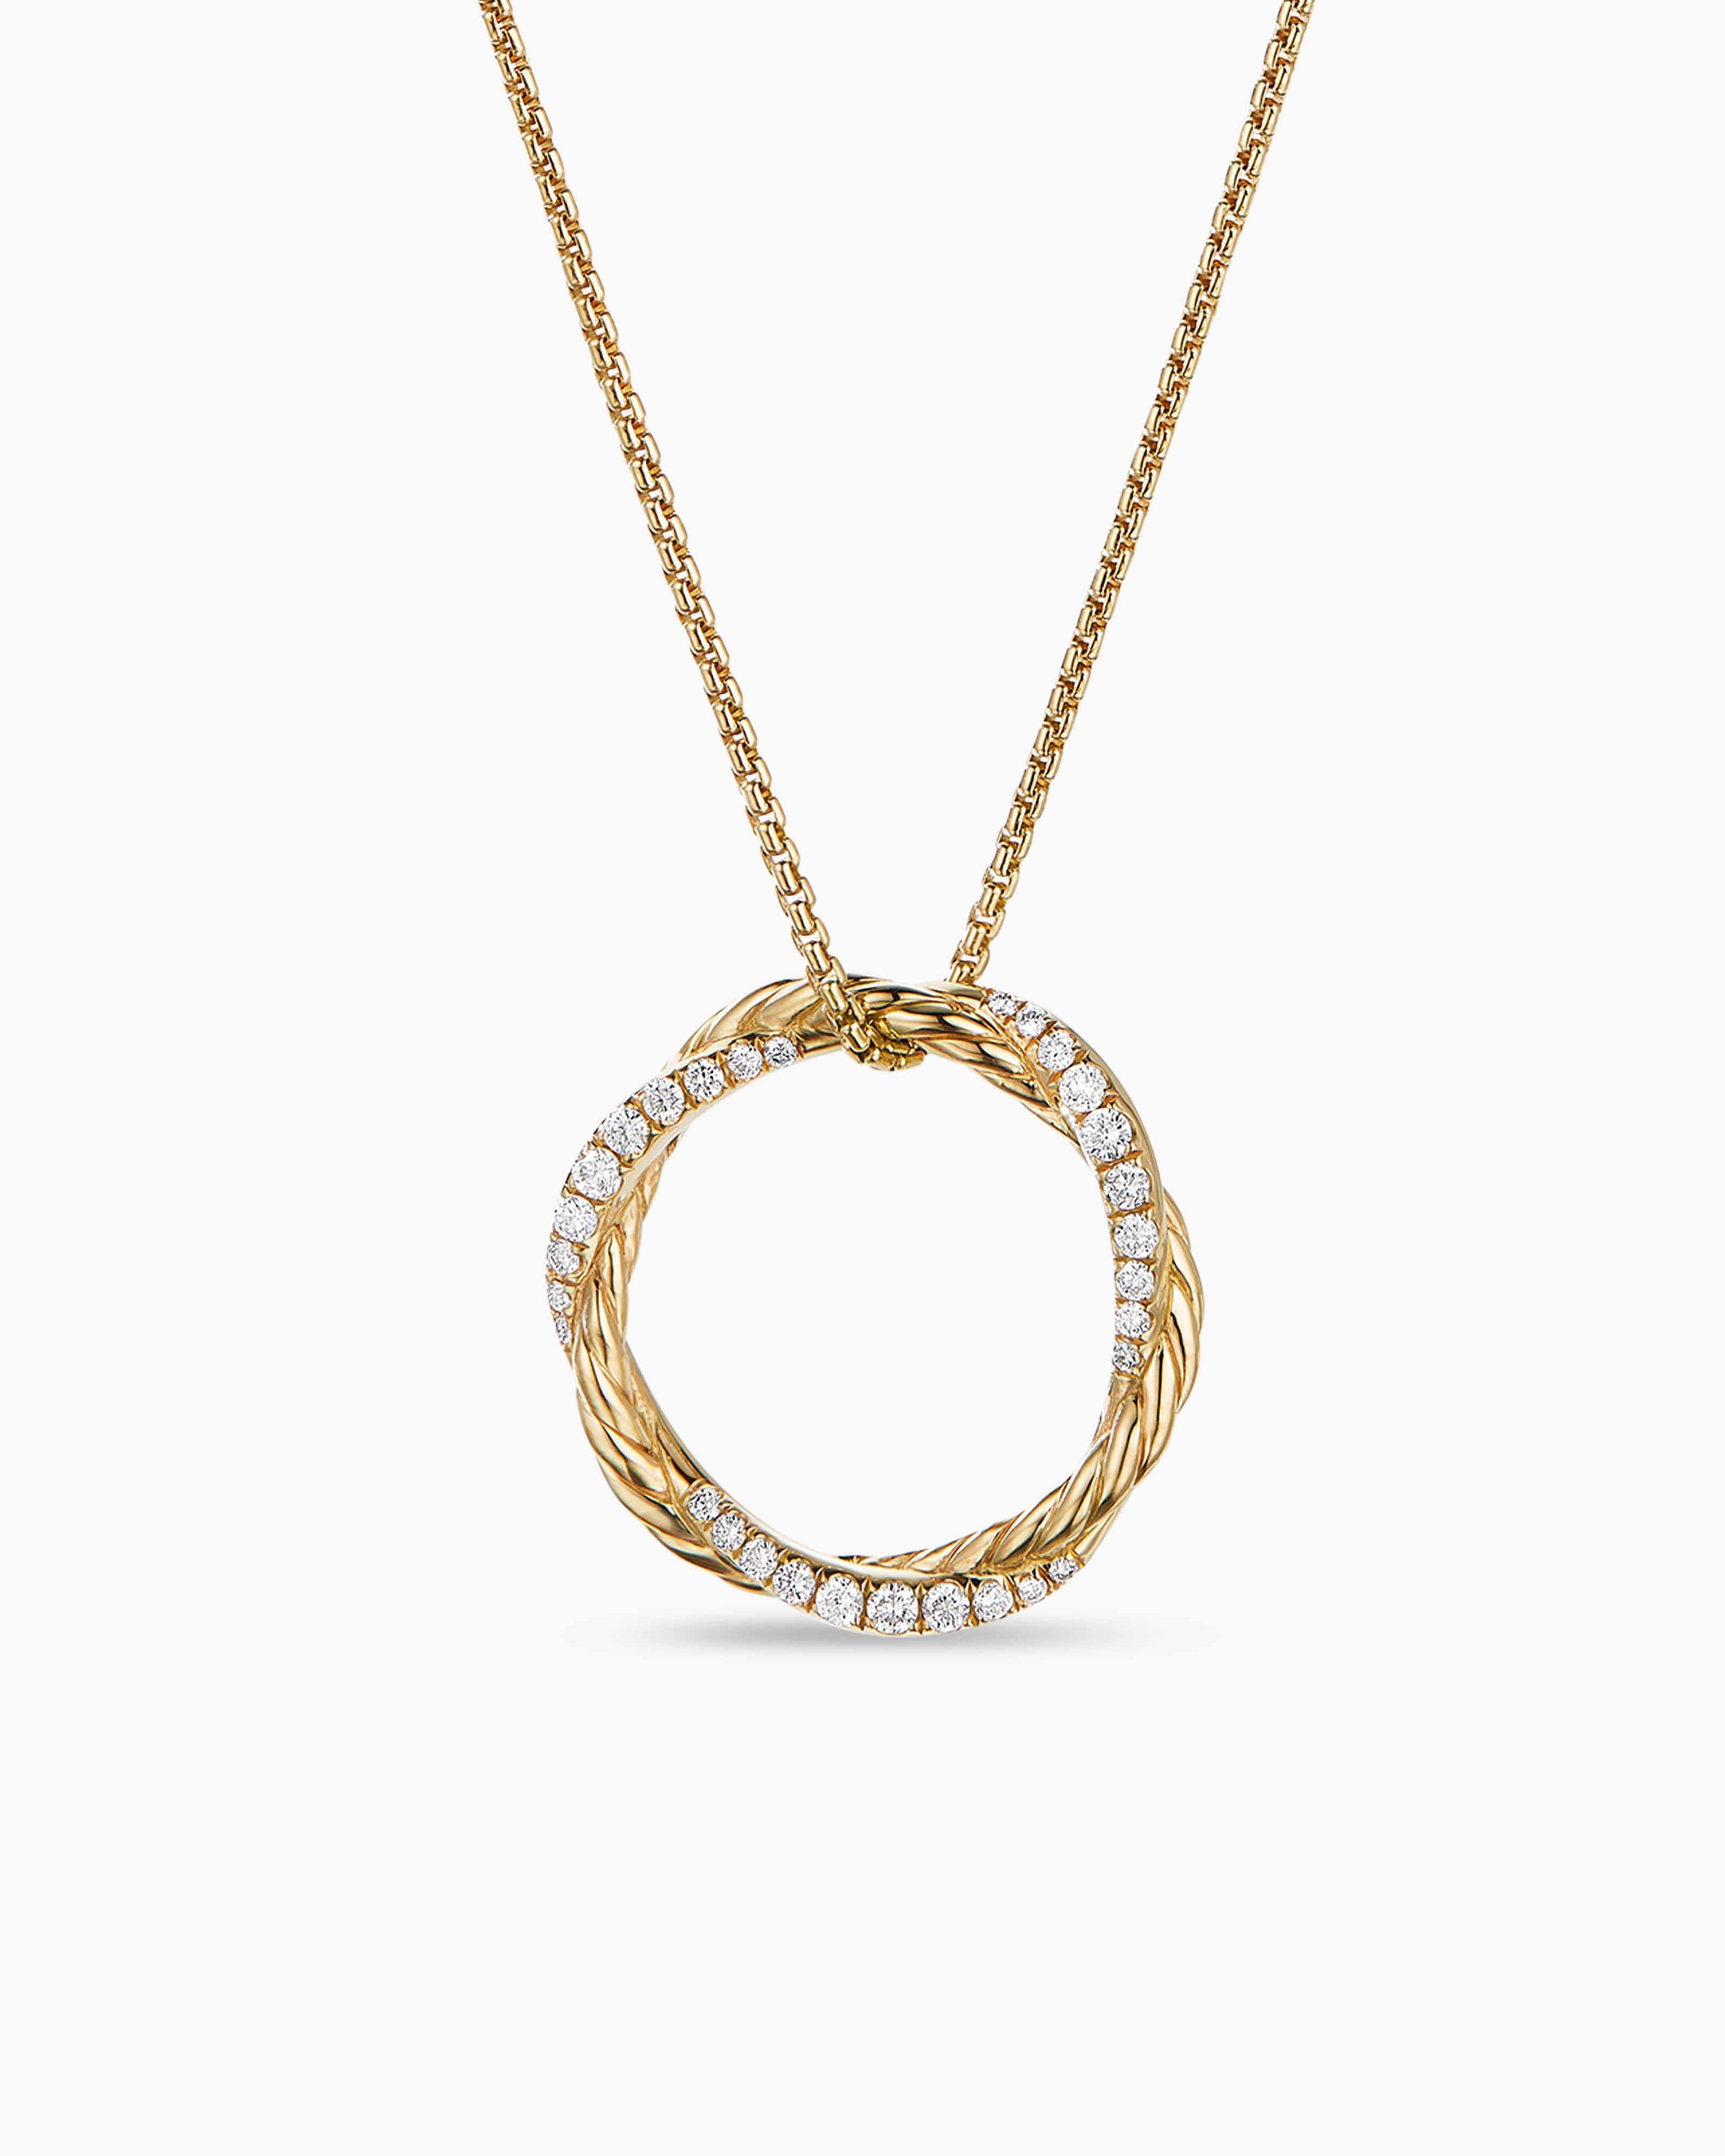 Petite Infinity Pendant Necklace in 18K Yellow Gold with Diamonds, 18mm ...